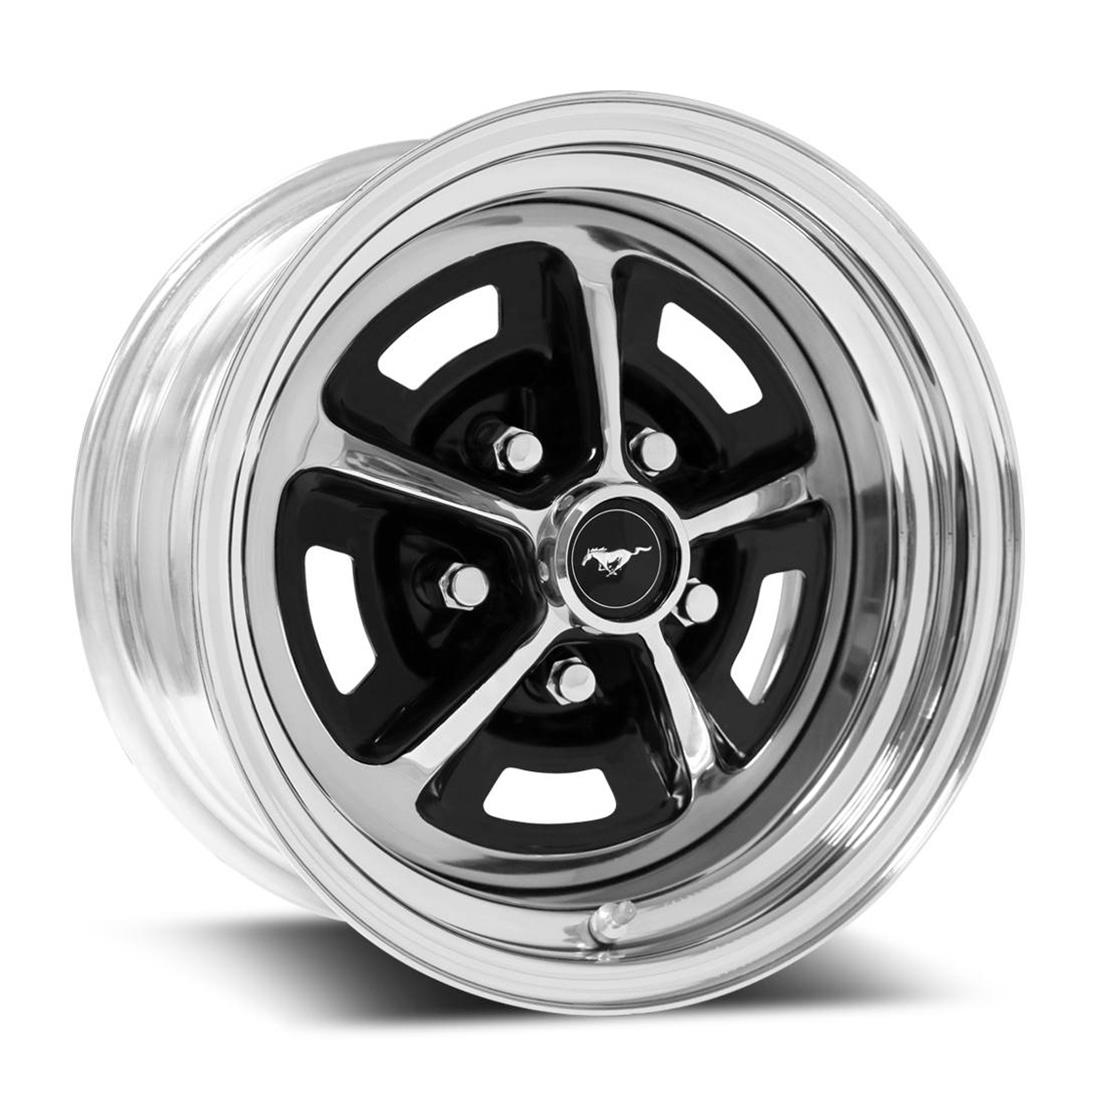 Free Shipping - Scott Drake Magnum 500 Wheels with qualifying orders of $99...